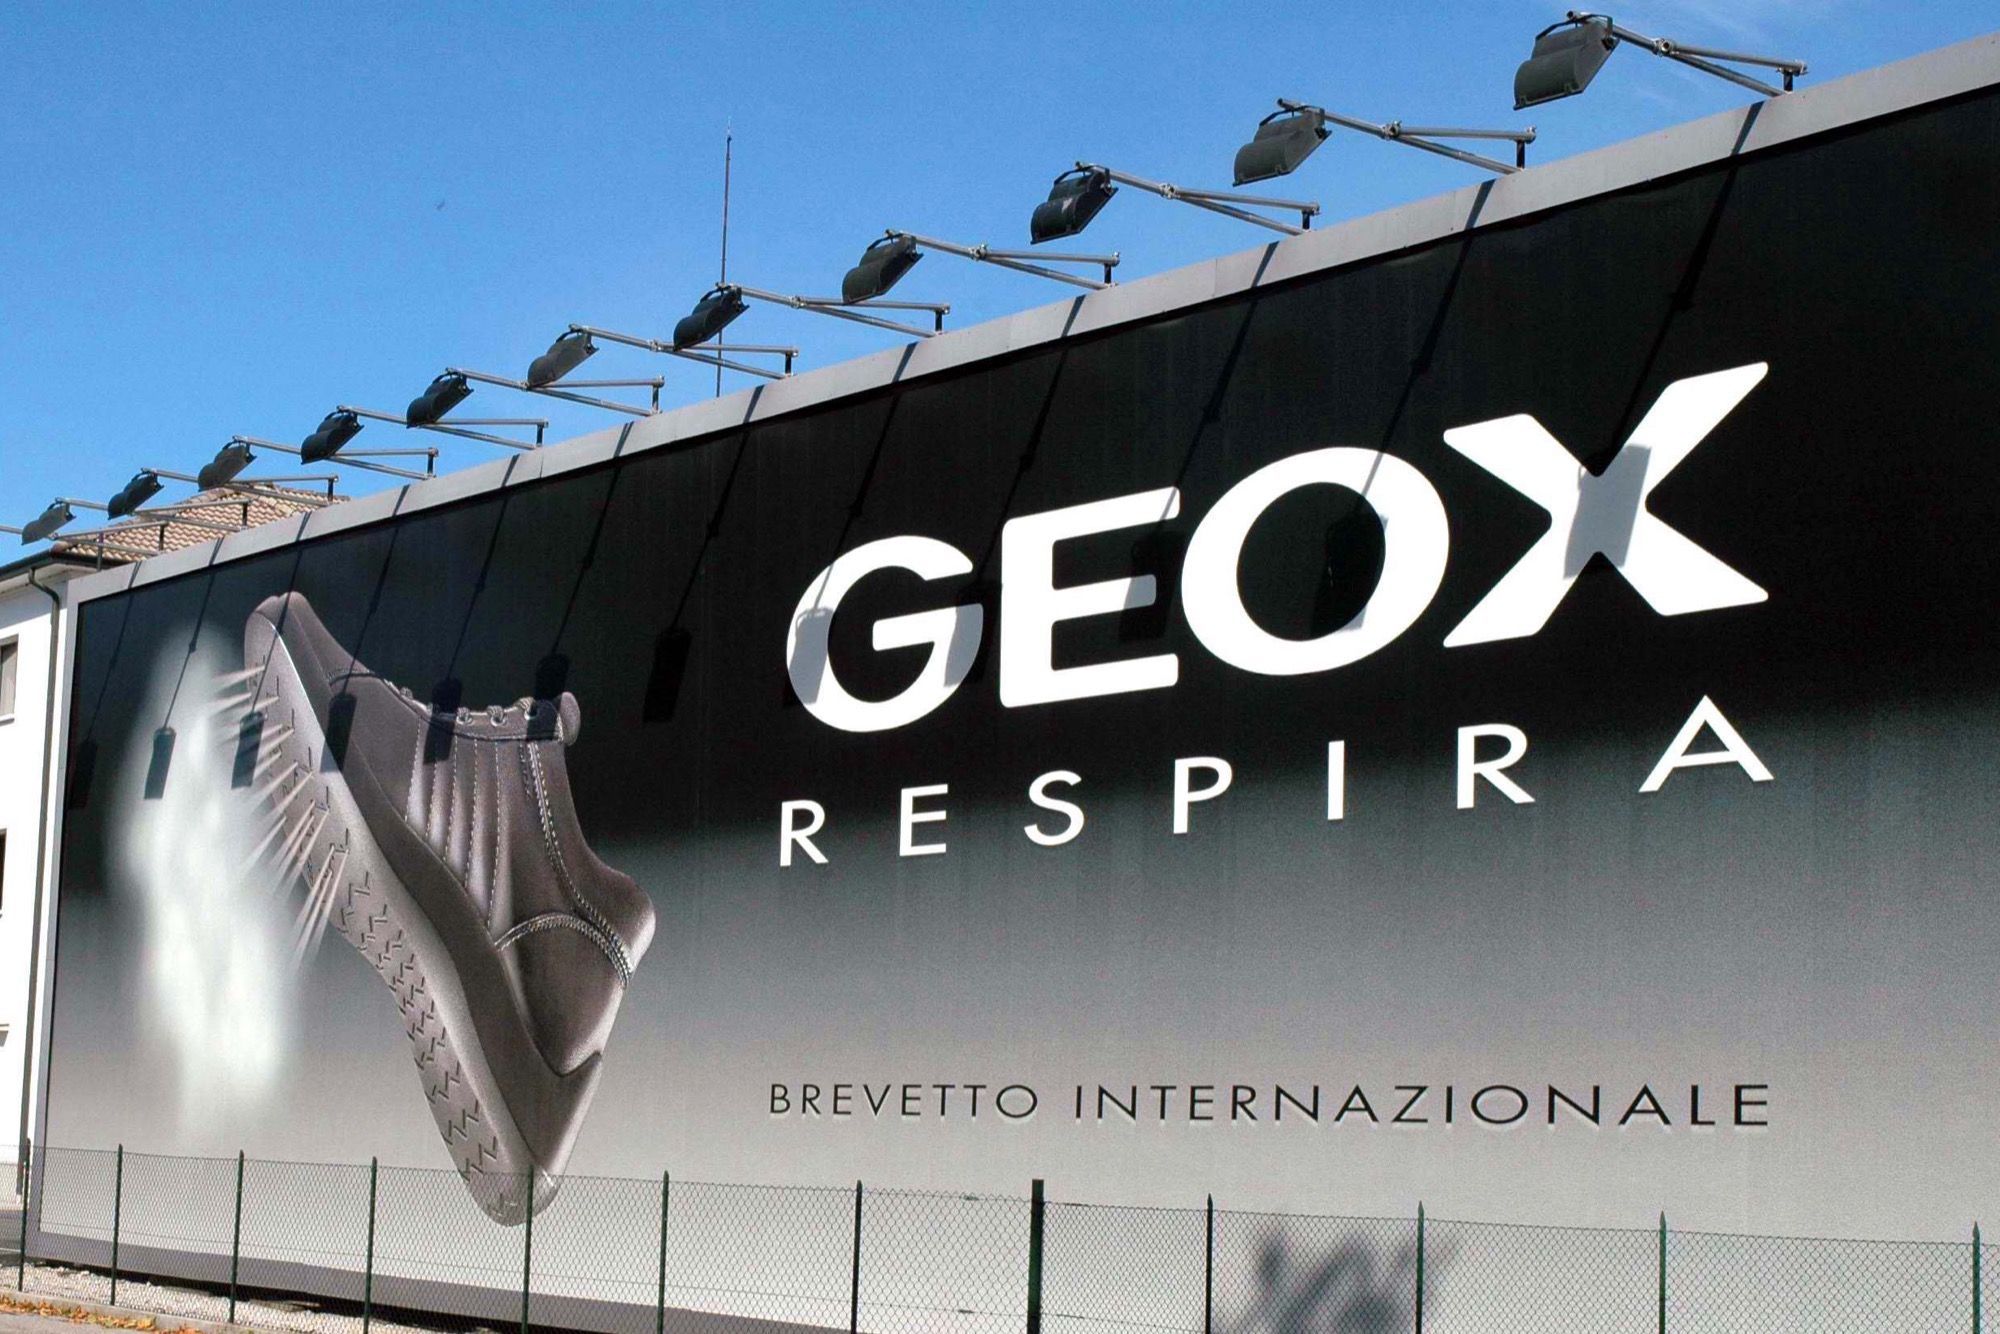 De nada microondas dedo What happened to Geox, the brand of "the shoe that breathes"